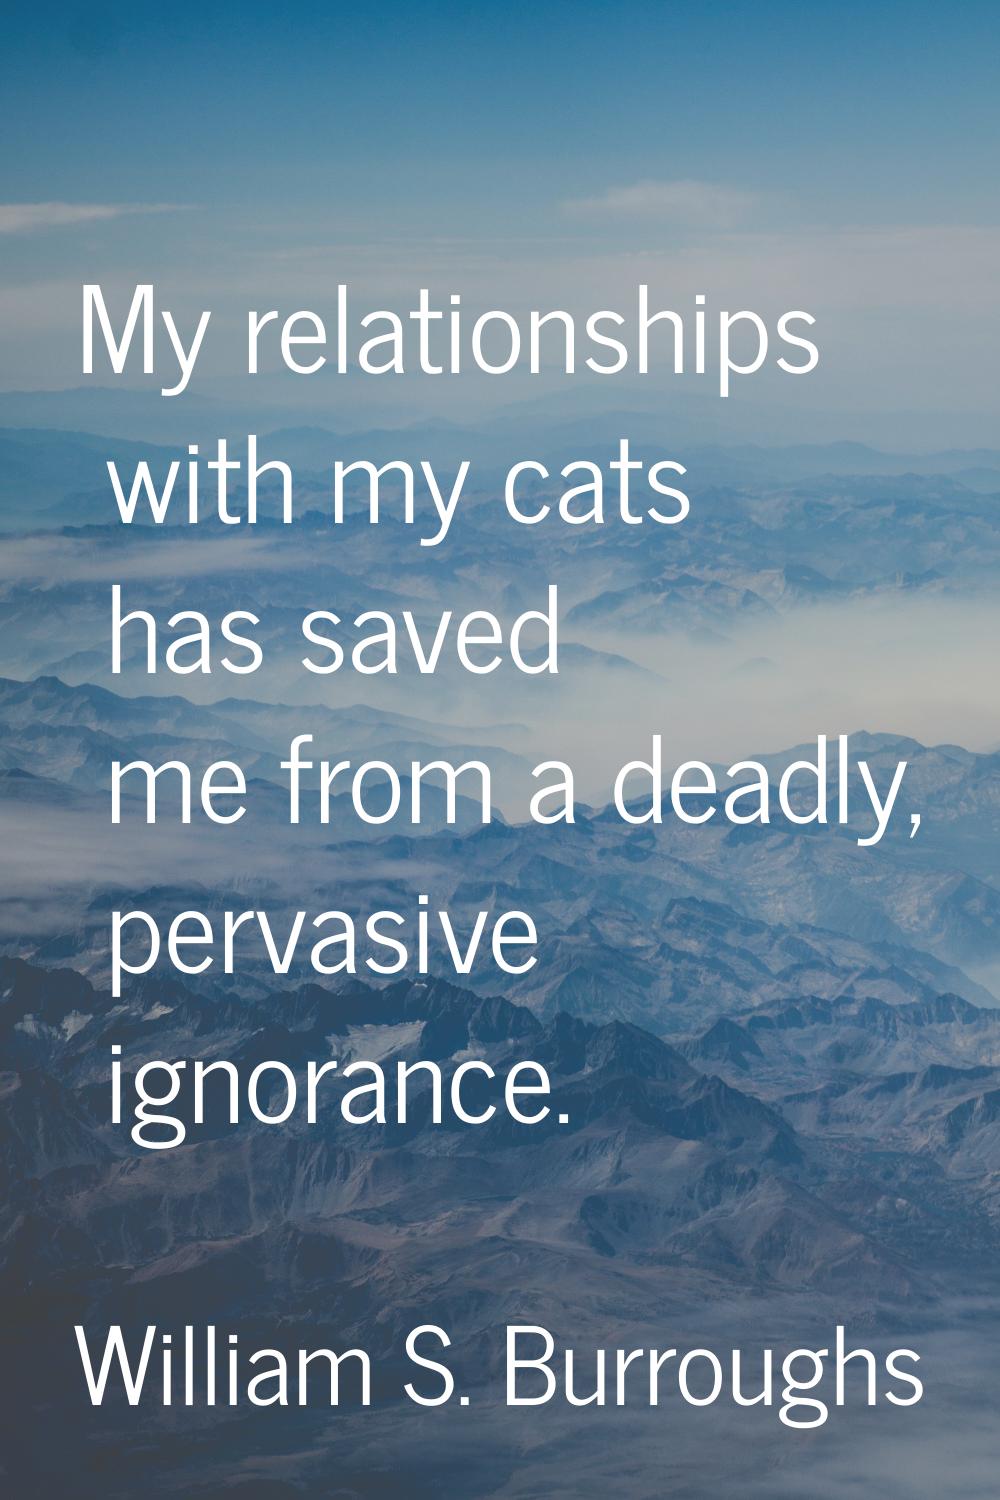 My relationships with my cats has saved me from a deadly, pervasive ignorance.